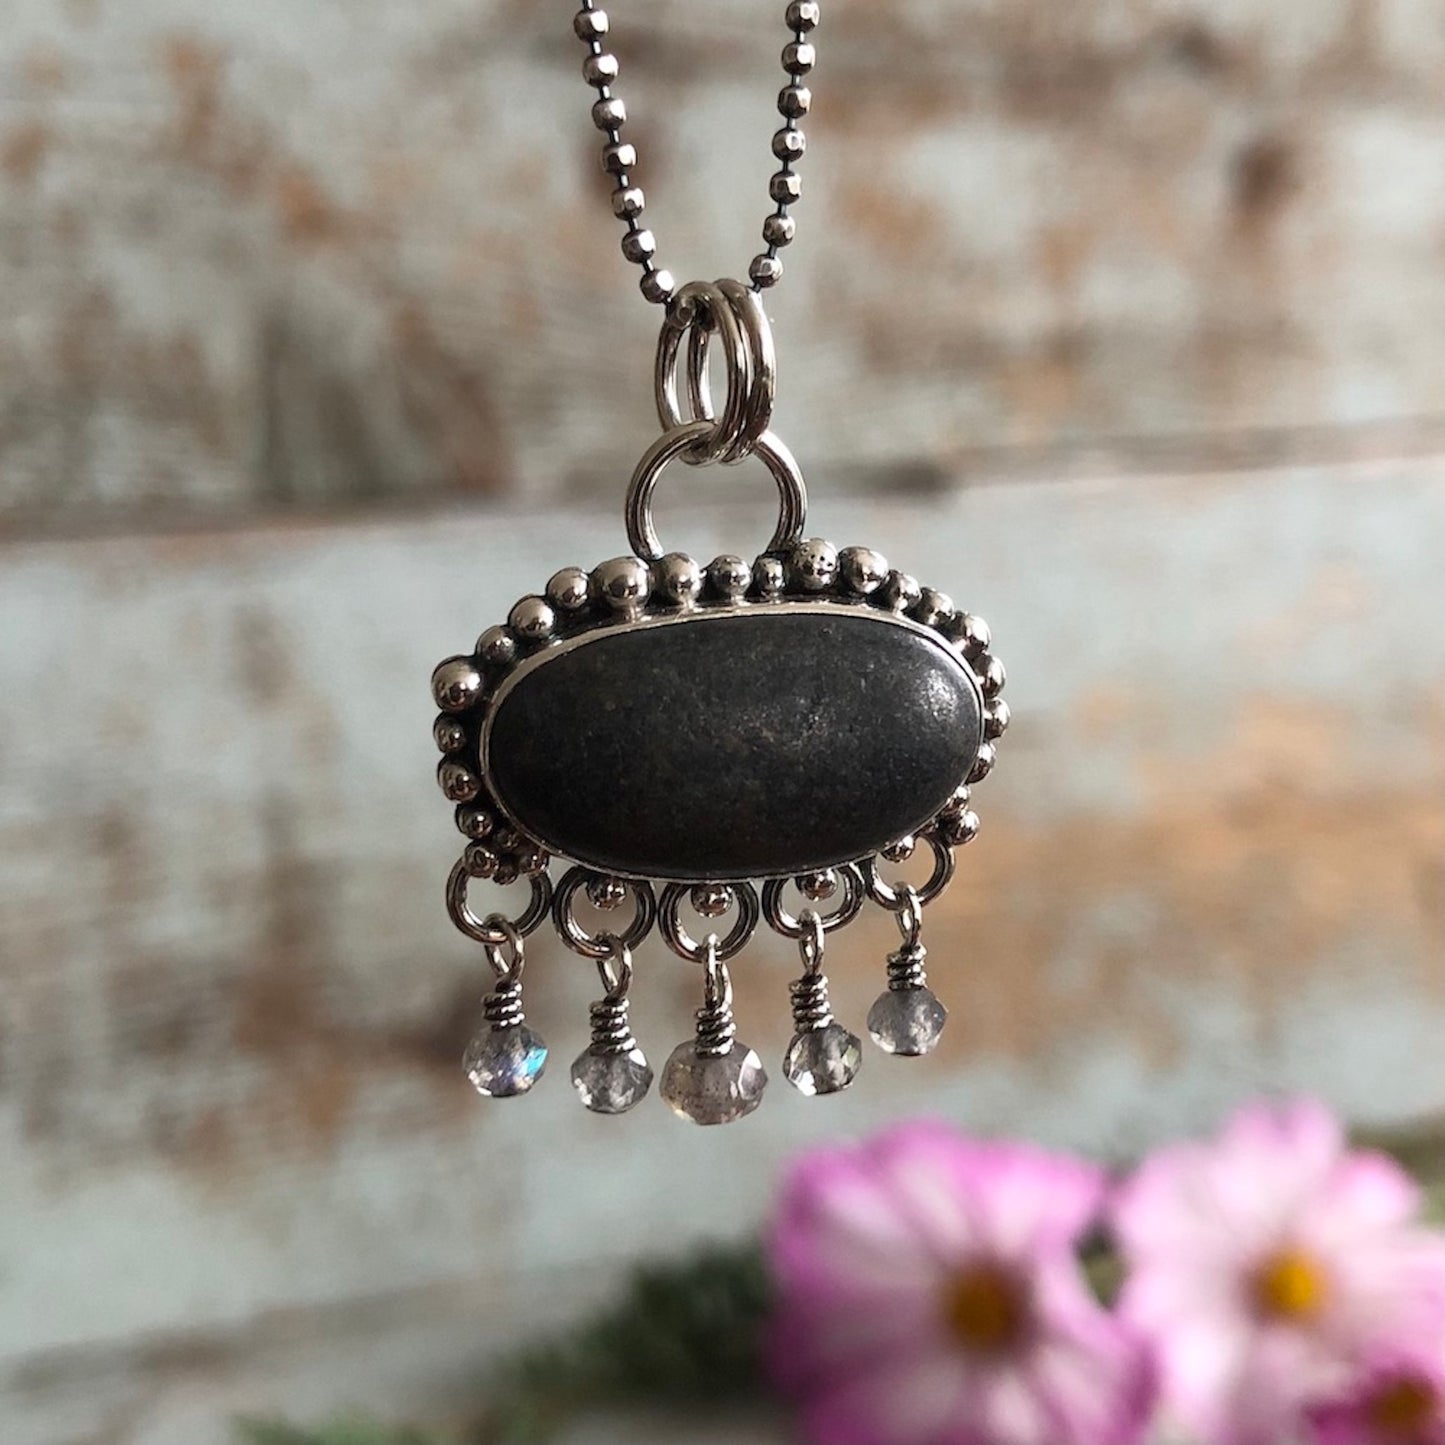 Chandelier Sterling Silver & Oval Beach Stone Pendant with Labradorite